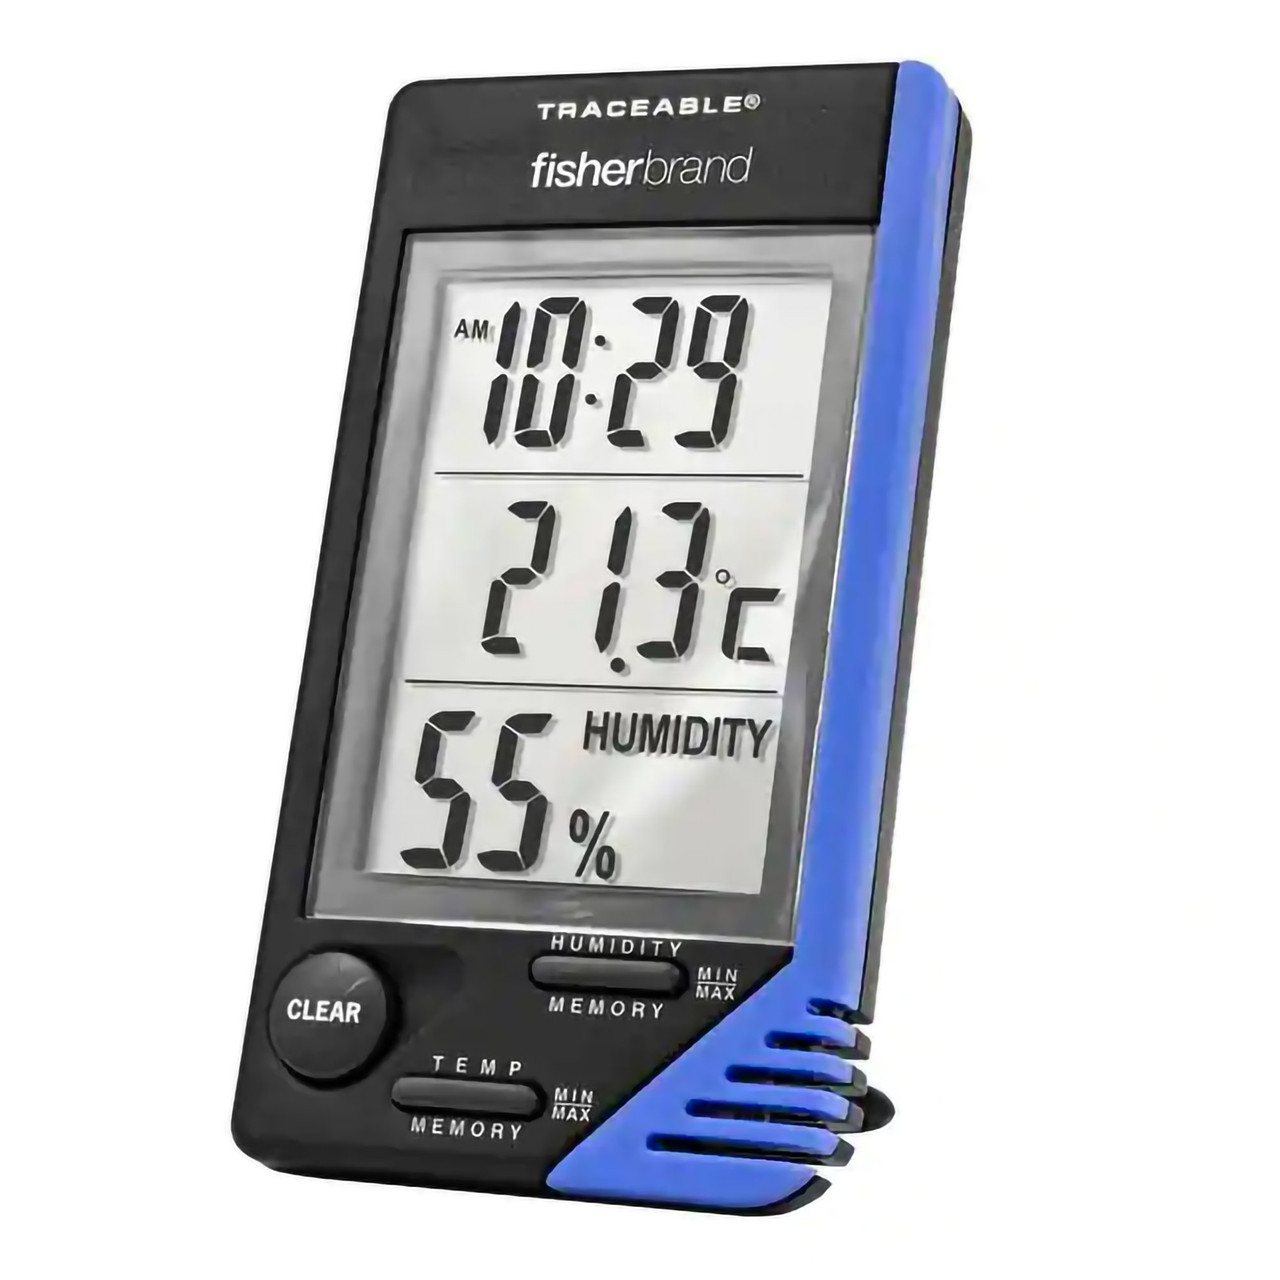 Fisherbrand Traceable Hi-Accuracy Refrigerator Thermometer:Thermometers